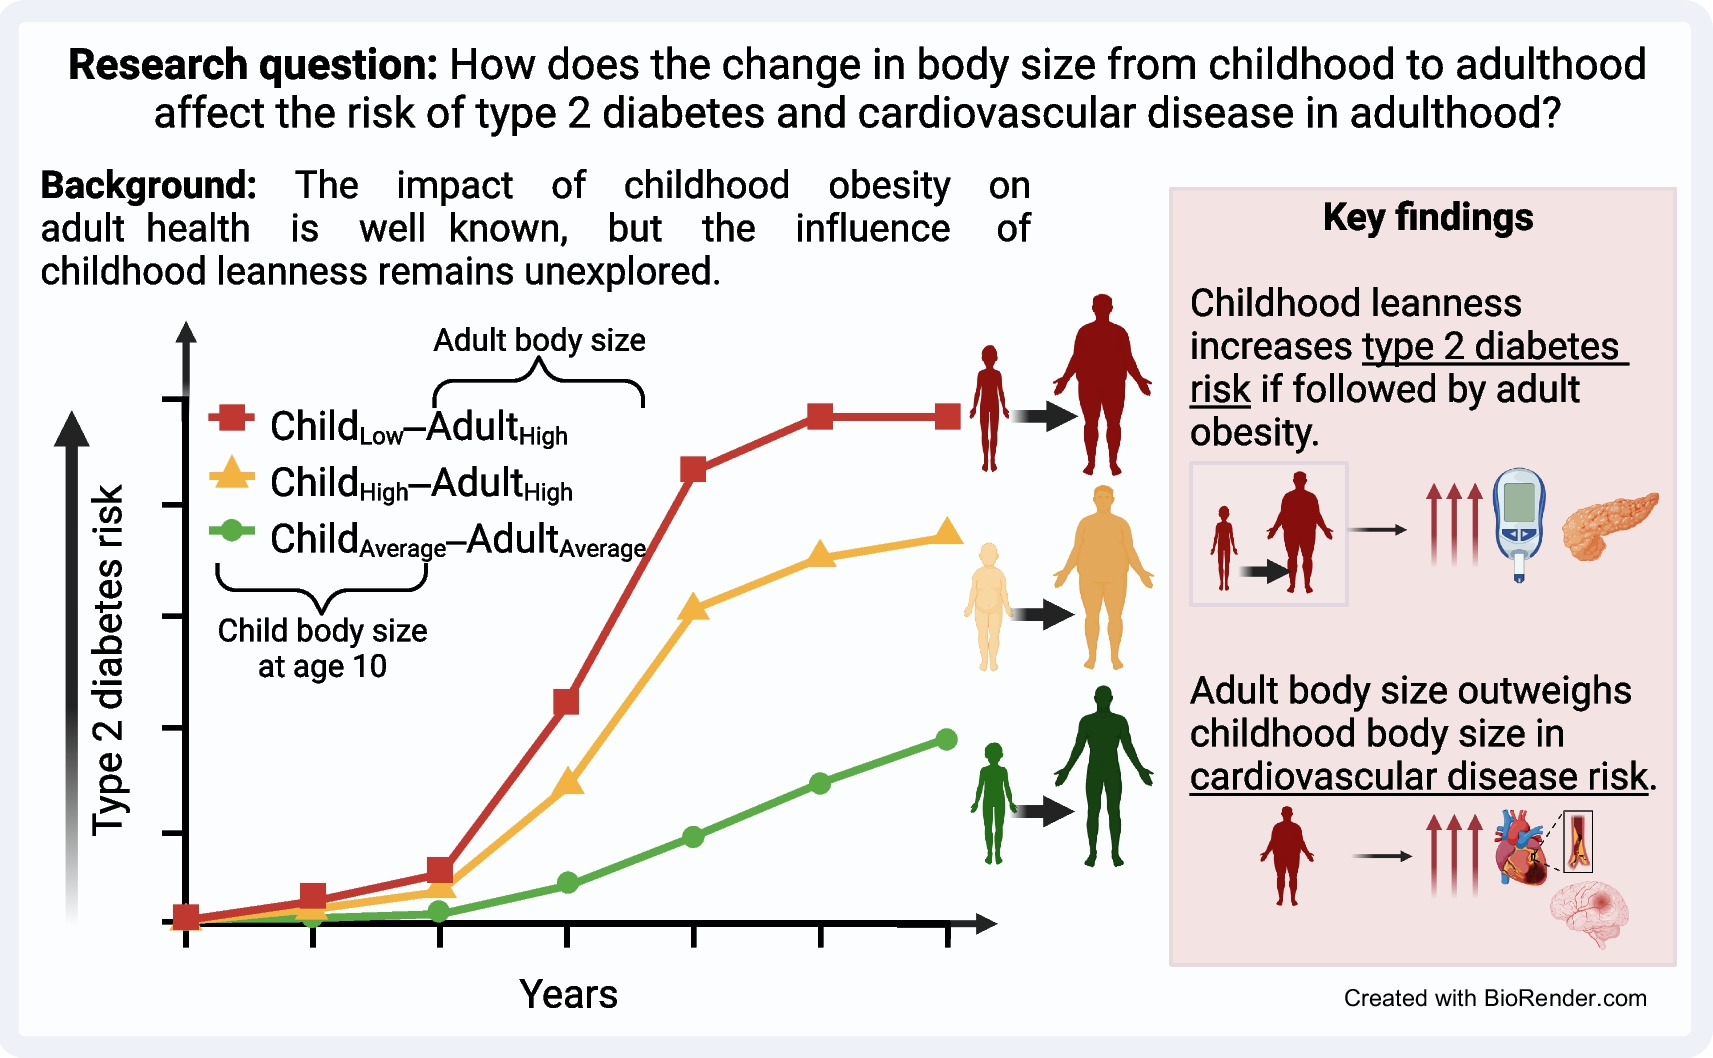 Child-to-adult body size change and risk of type 2 diabetes and cardiovascular disease